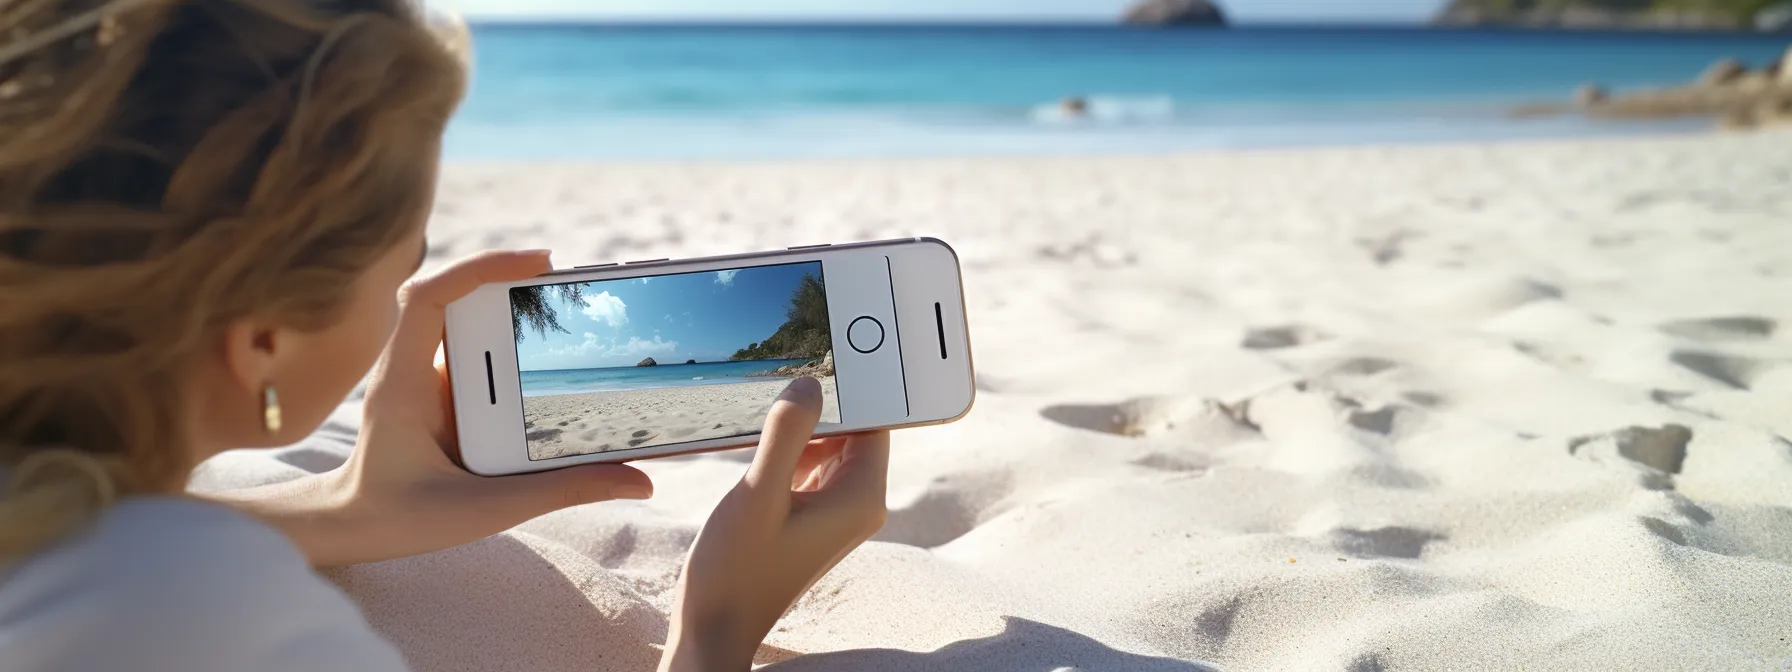 A woman is enjoying her time at Secrets Resorts while capturing a picture with her cell phone on the beach.